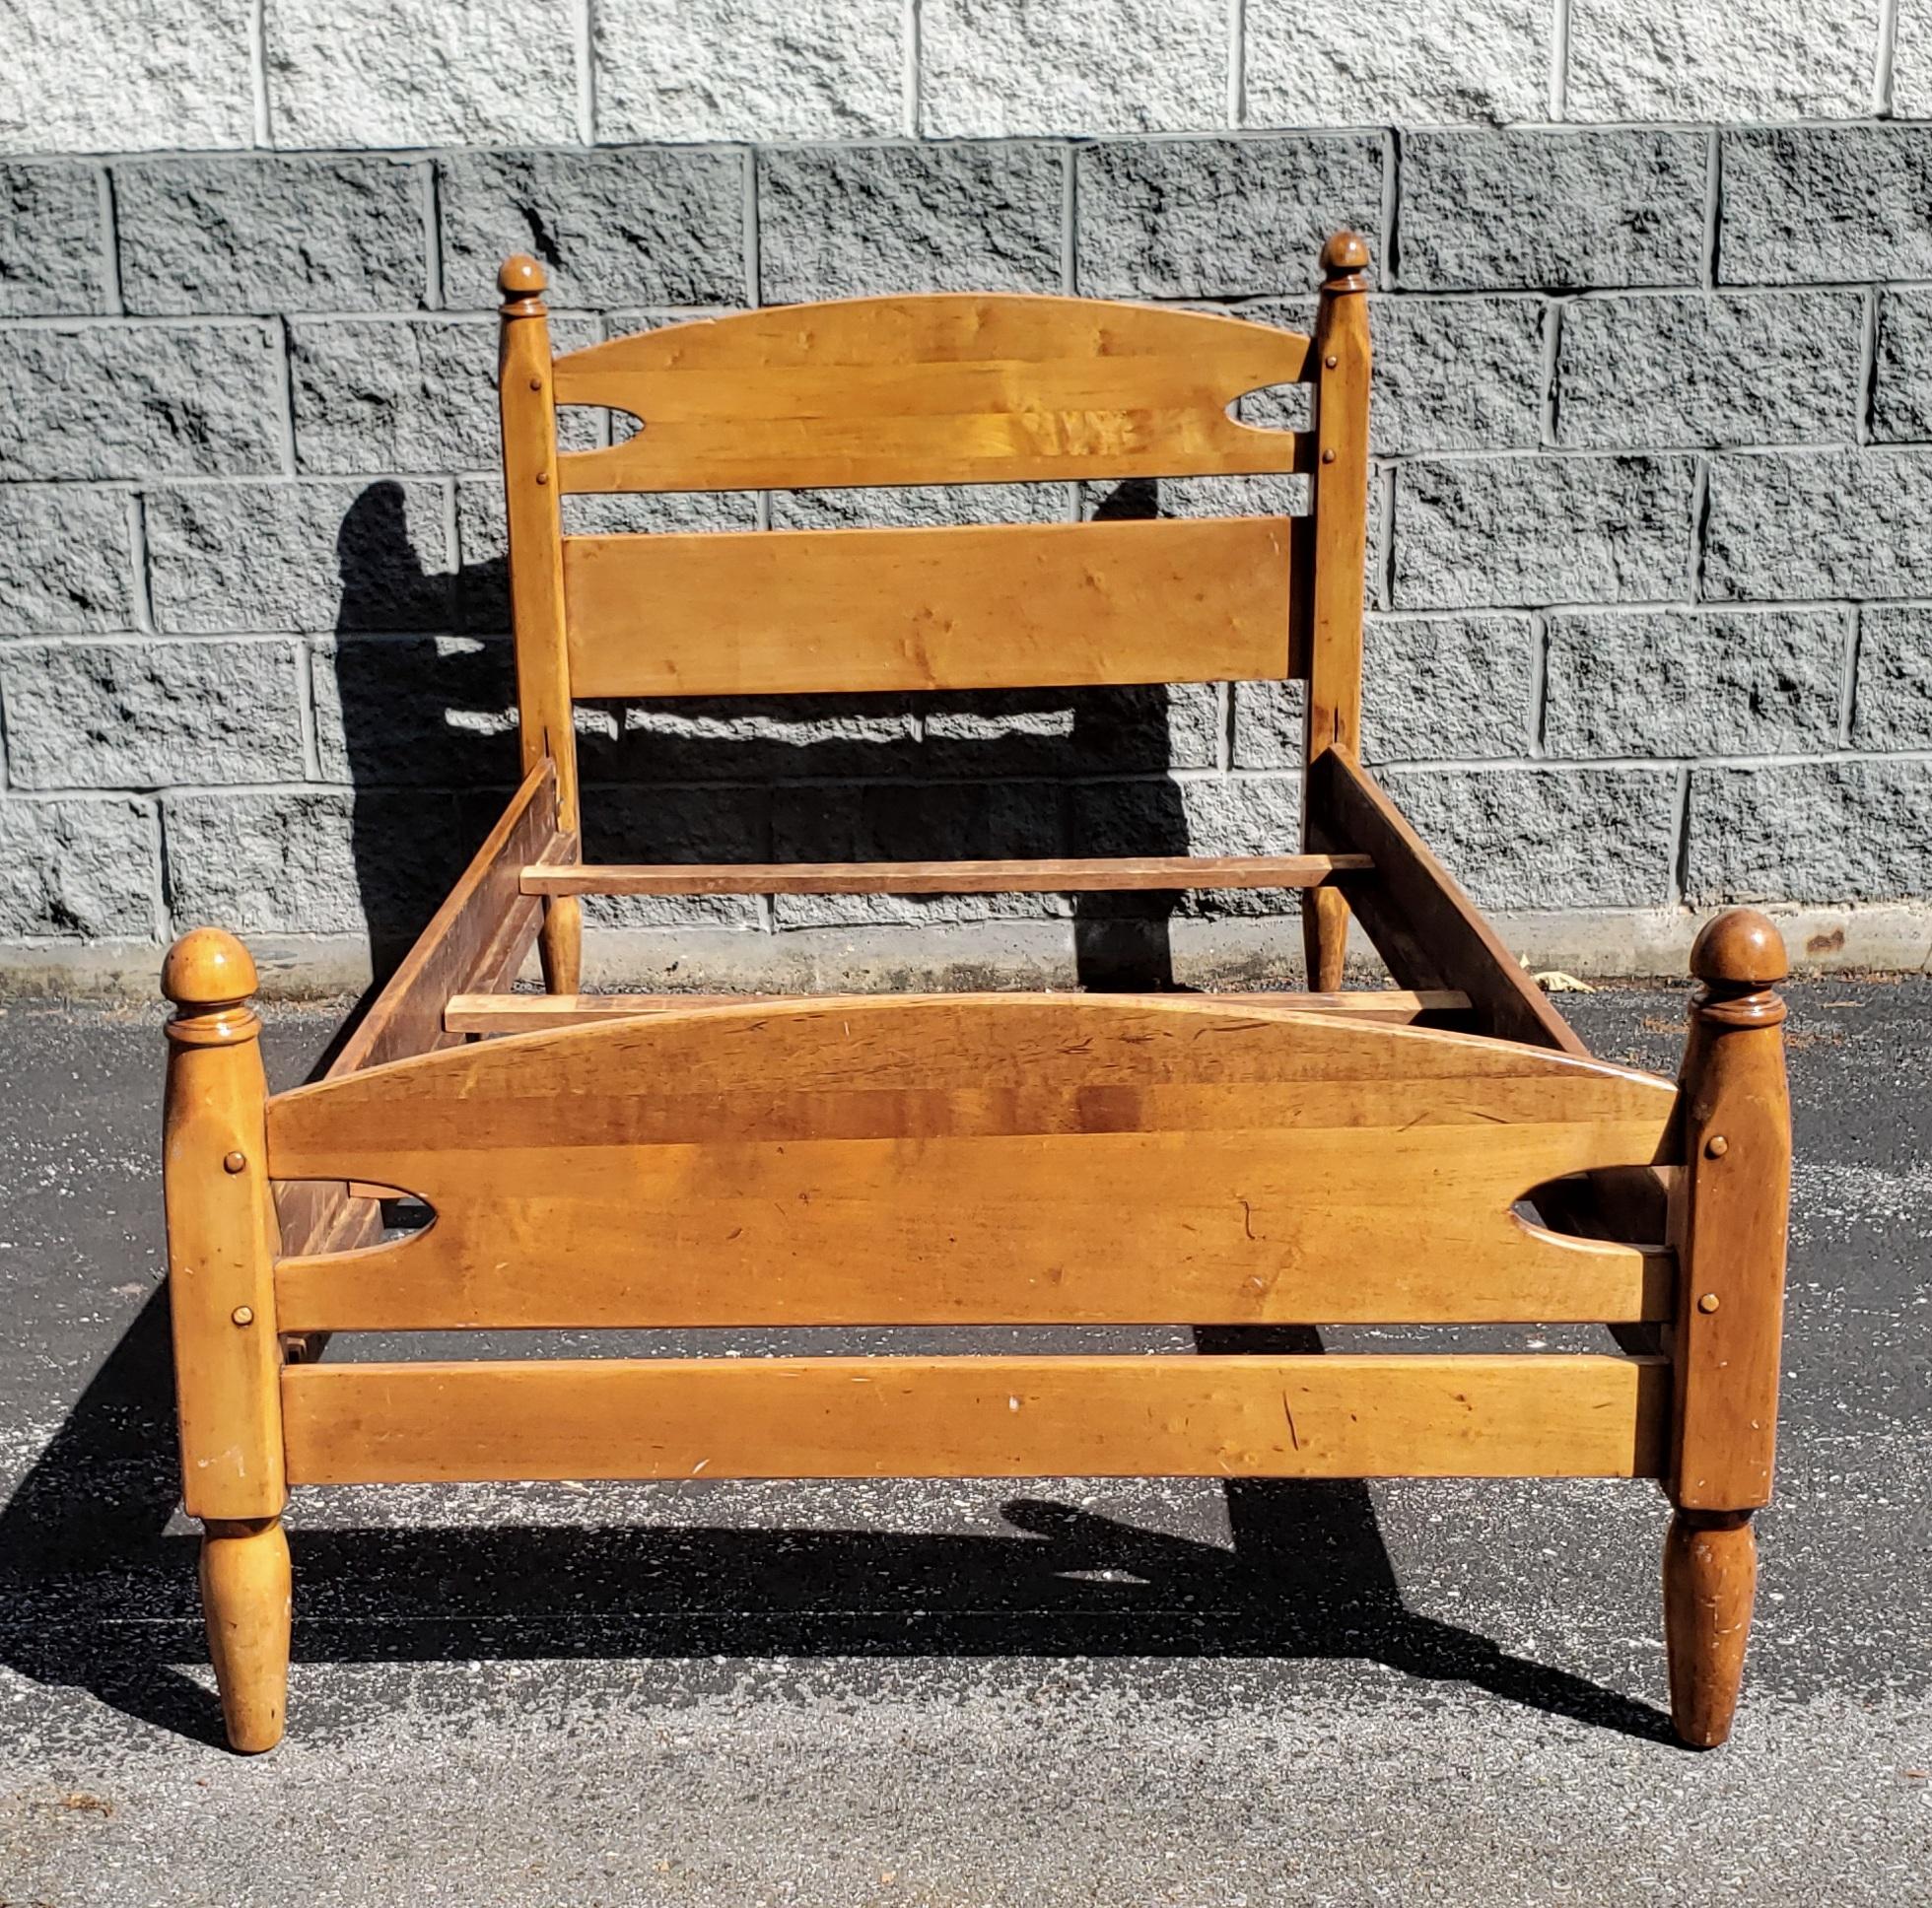 A Pair 1930s Ethan Allen by Baumritter Heirloom Maple Twin size Bed Frames. These beaities have been recently refinished and look awesome. These are one of the first Ethan Allen production lines by Baumritter in the 1930s when Ethan Allen was